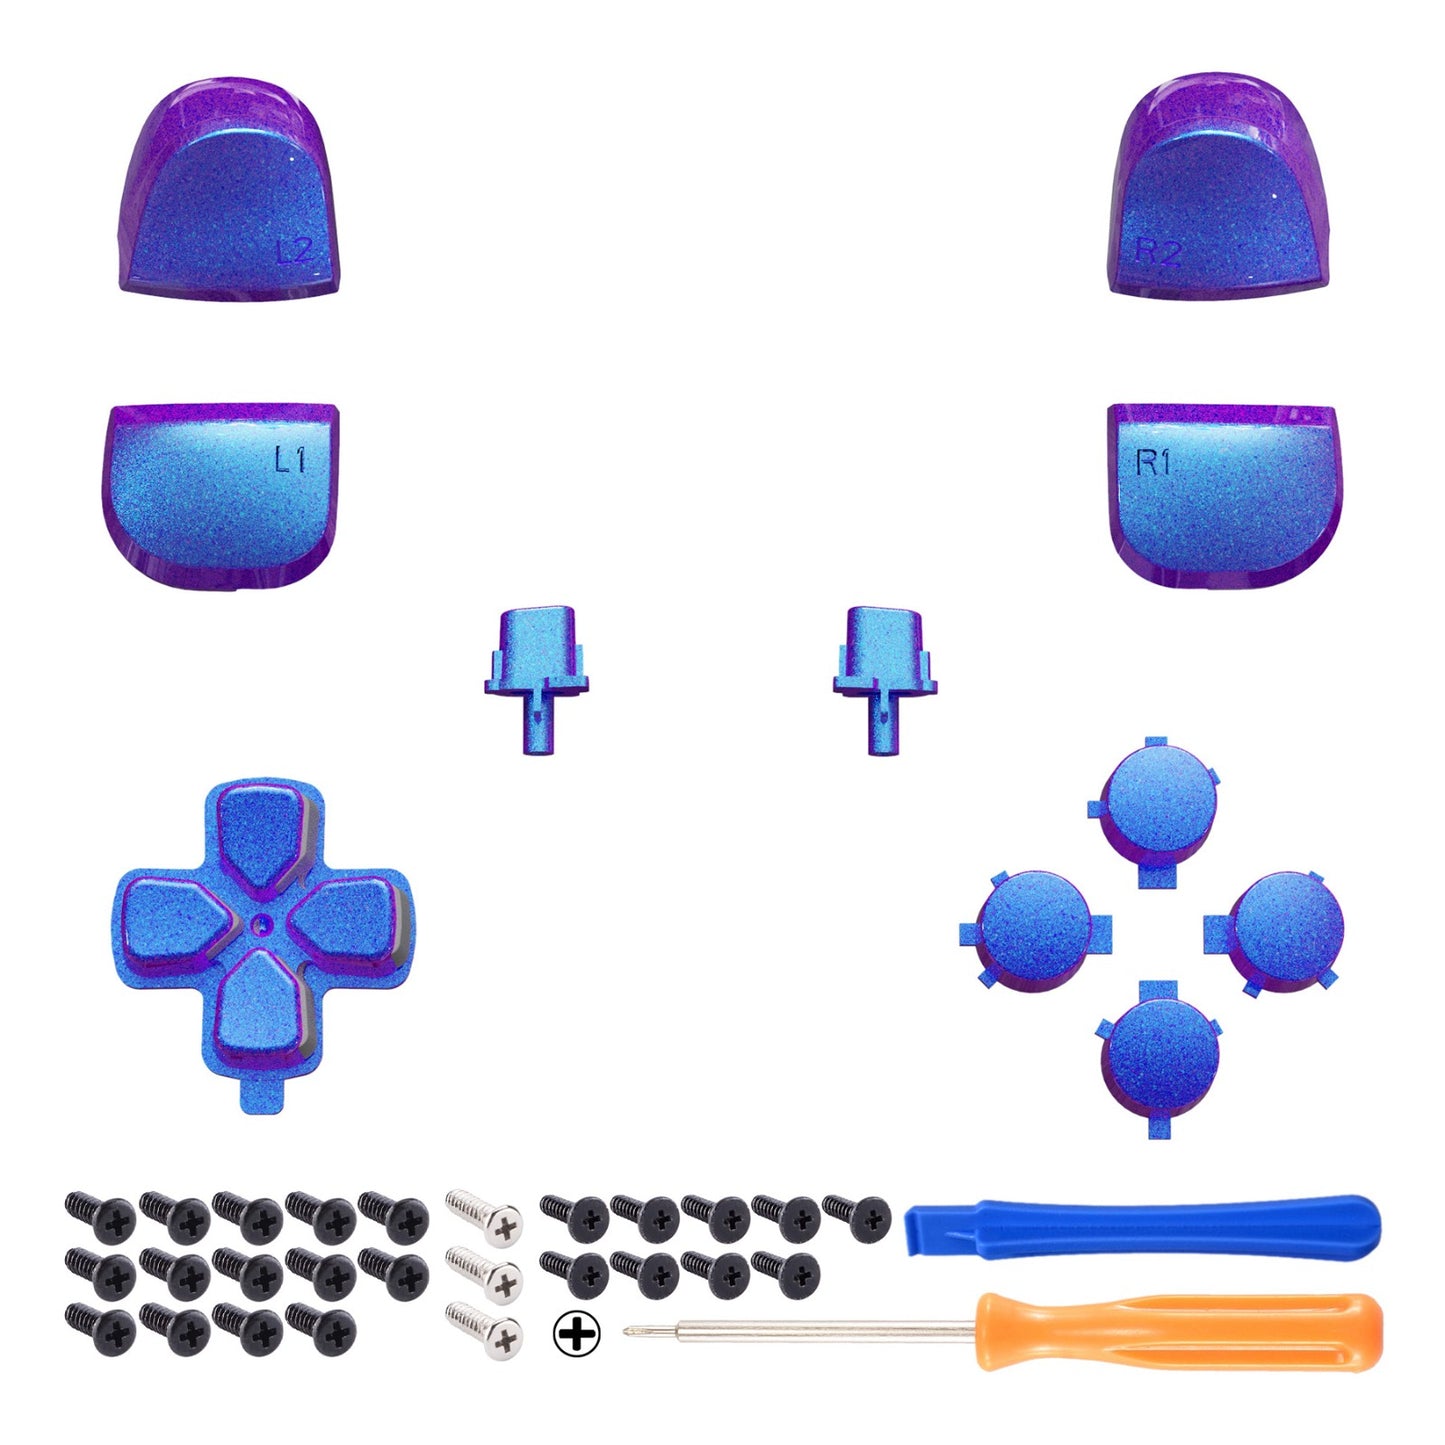 eXtremeRate Retail Replacement D-pad R1 L1 R2 L2 Triggers Share Options Face Buttons, Chameleon Purple Blue Full Set Buttons Compatible with ps5 Controller BDM-010 & BDM-020 - JPF1001G2